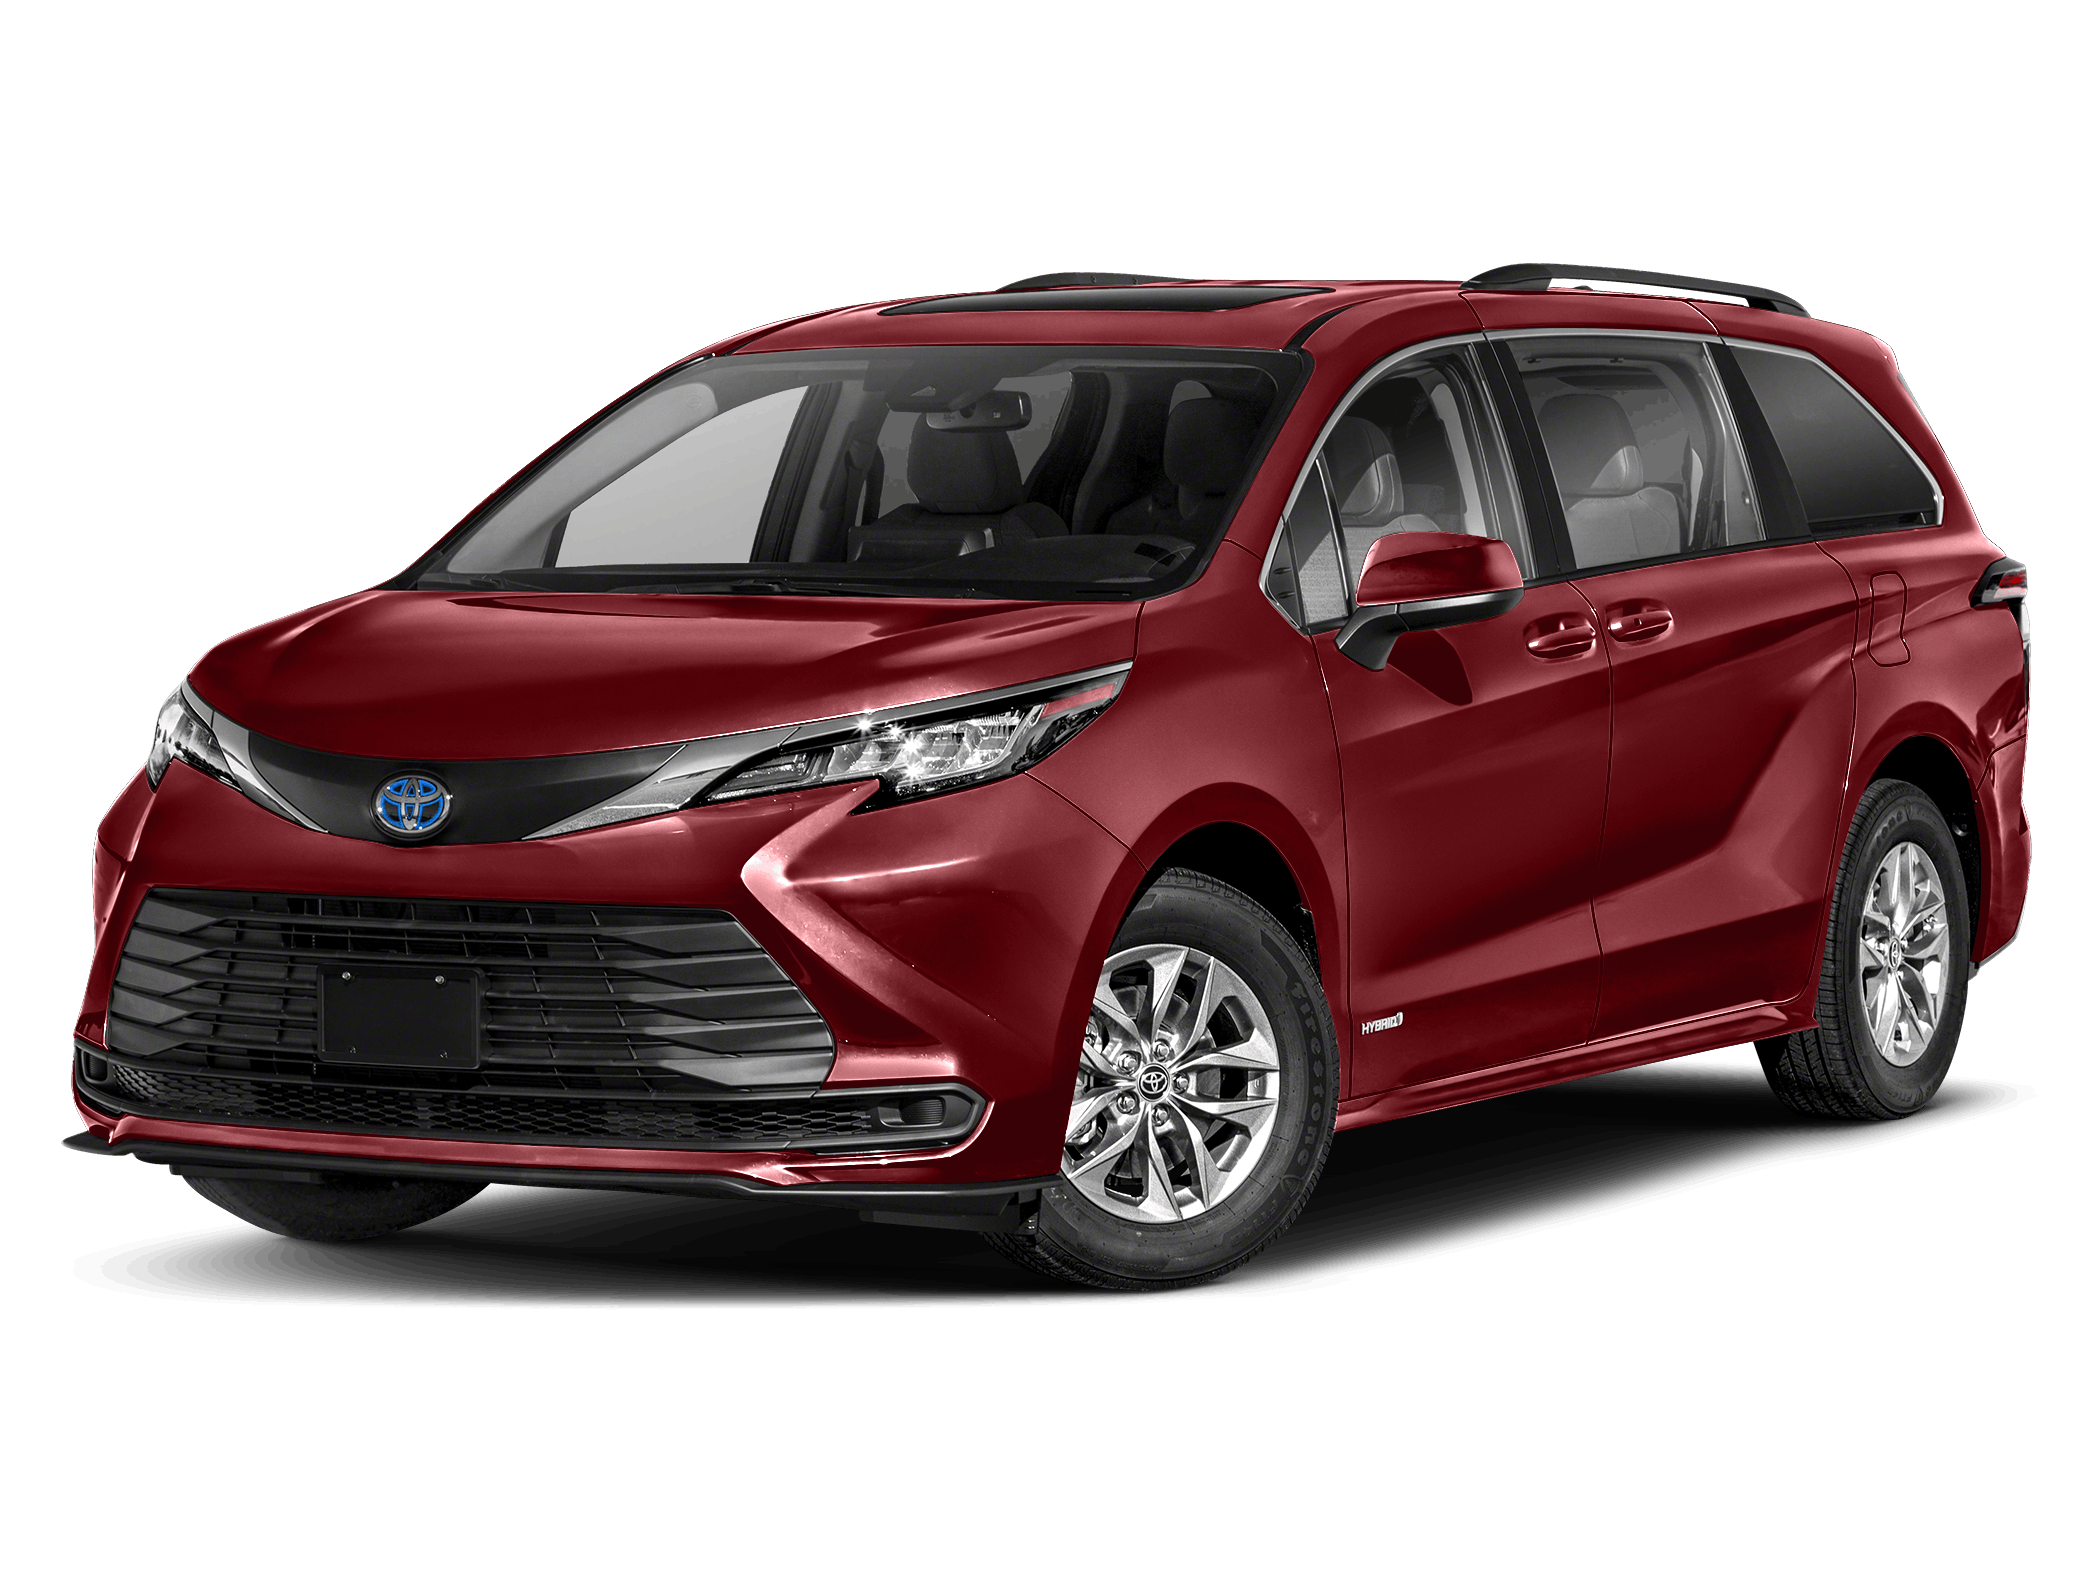 Toyota Sienna Prime Technically Possible, But Unlikely